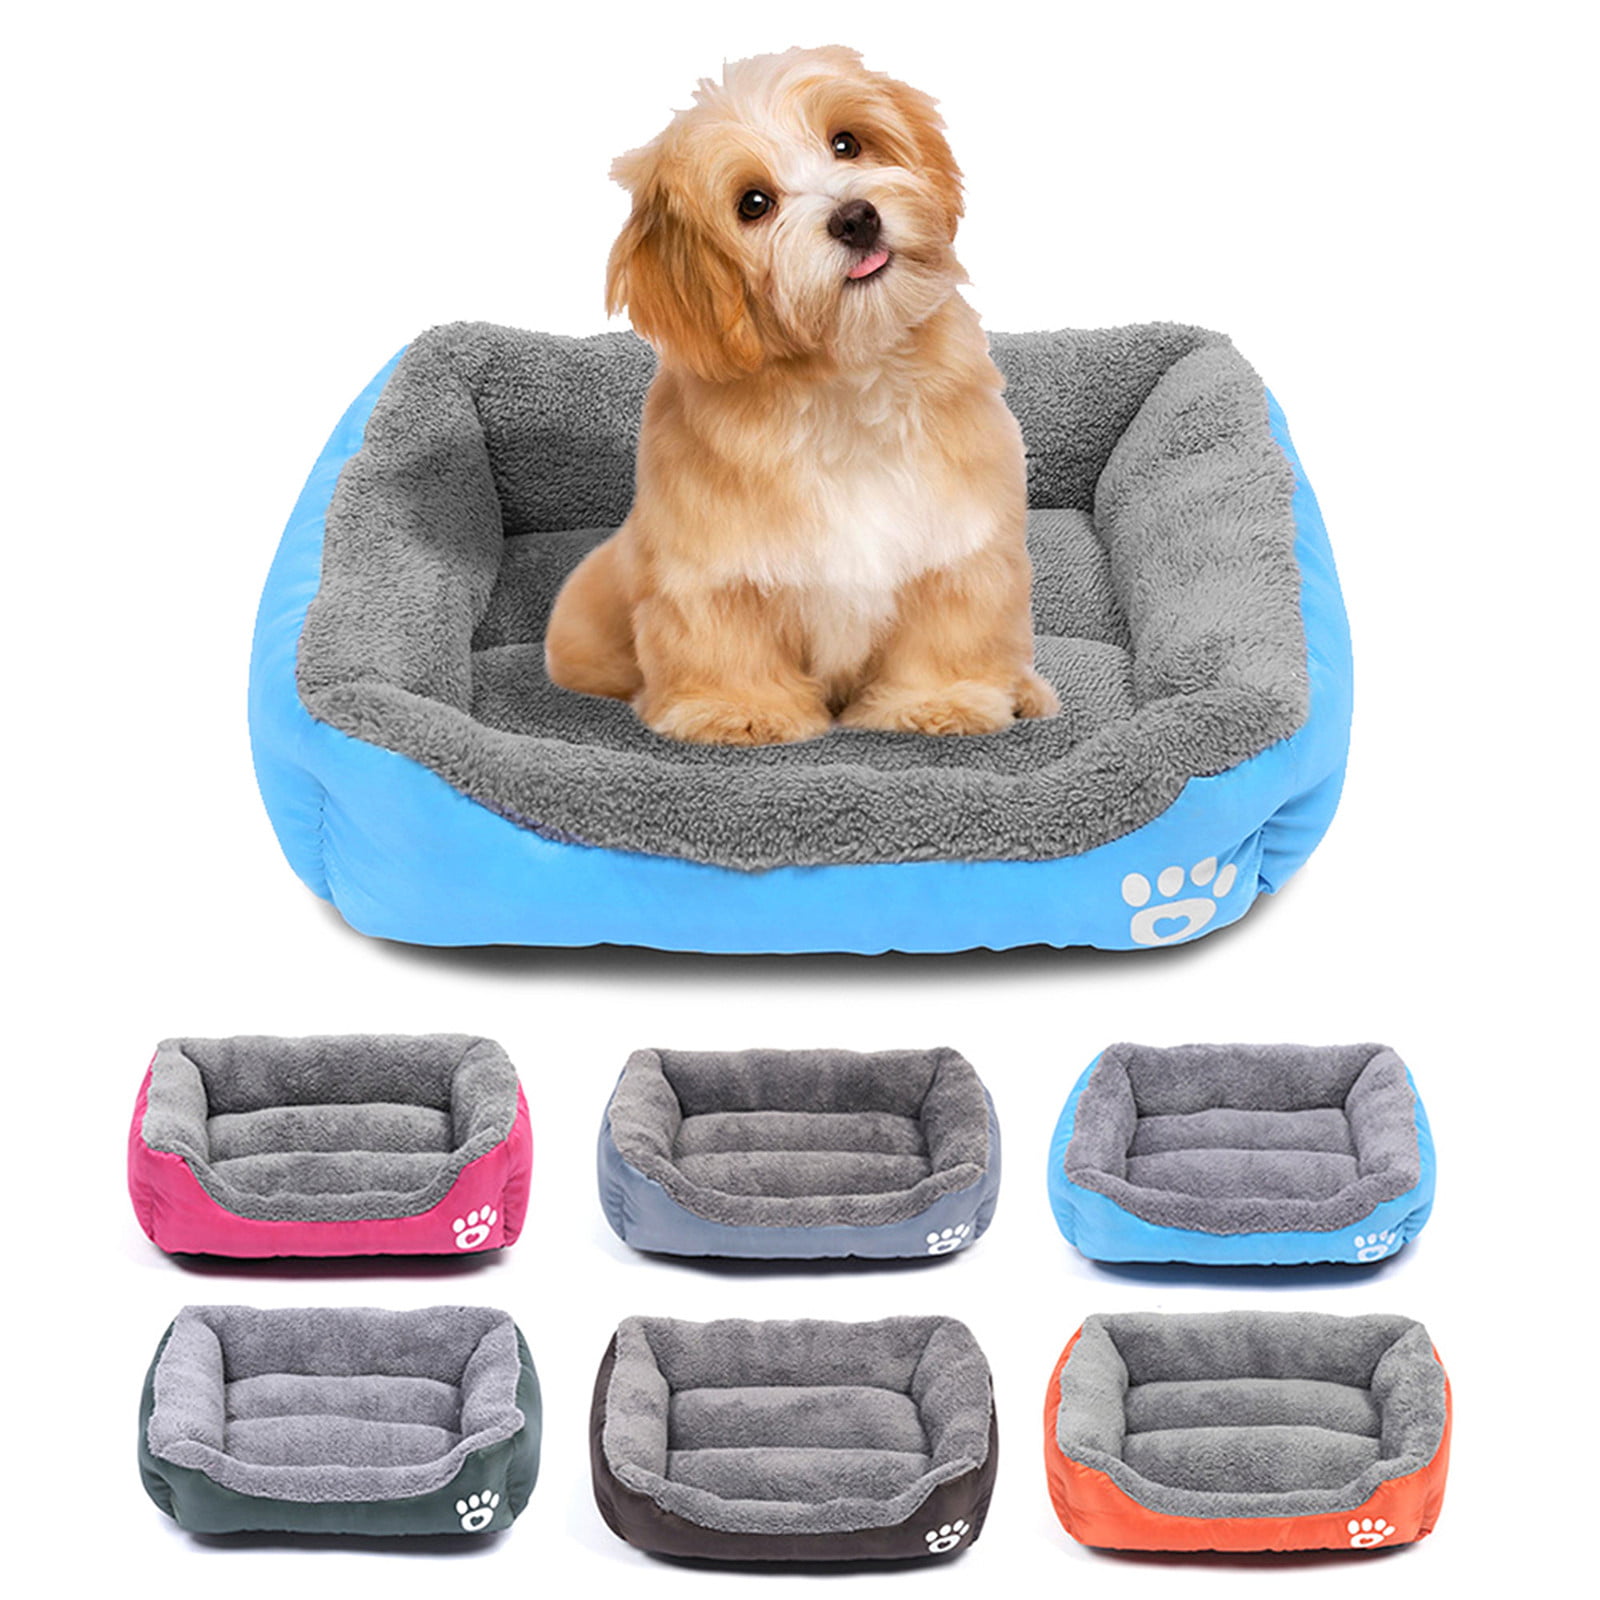 Large Pet Dog Cat Bed Puppy Cushion House Soft Warm Kennel Mat Blanket 6 Size 